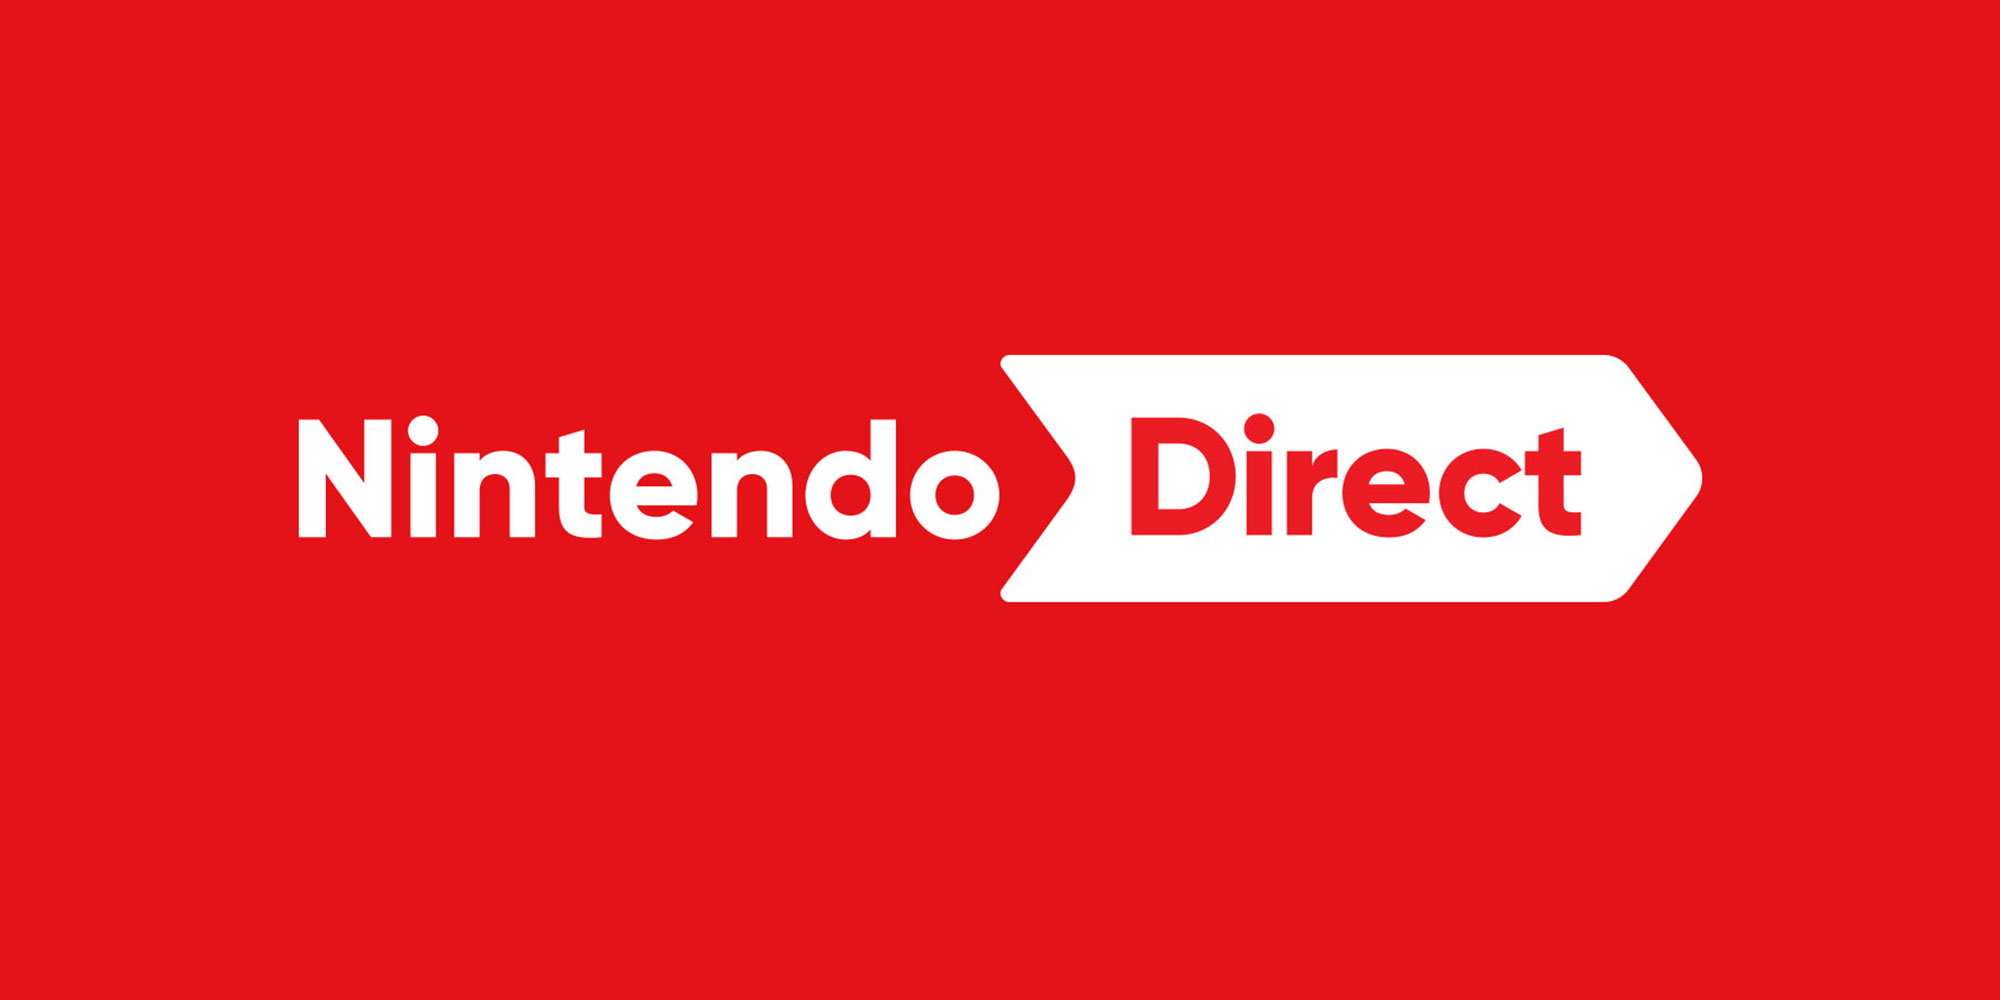 Insiders: Nintendo Direct could happen as early as next week